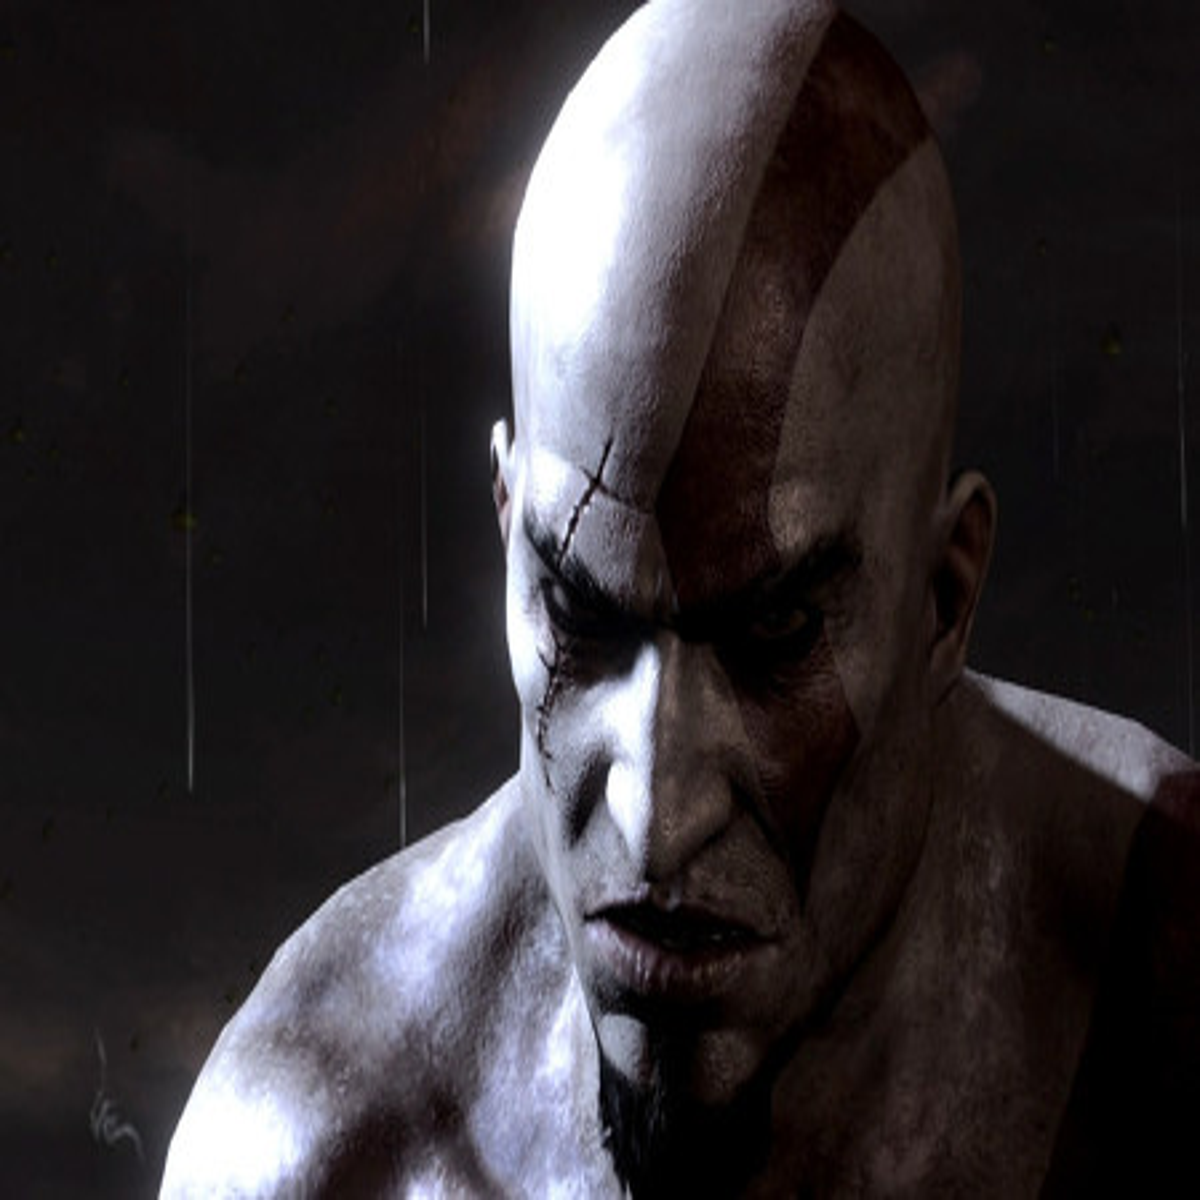 kratos angry face